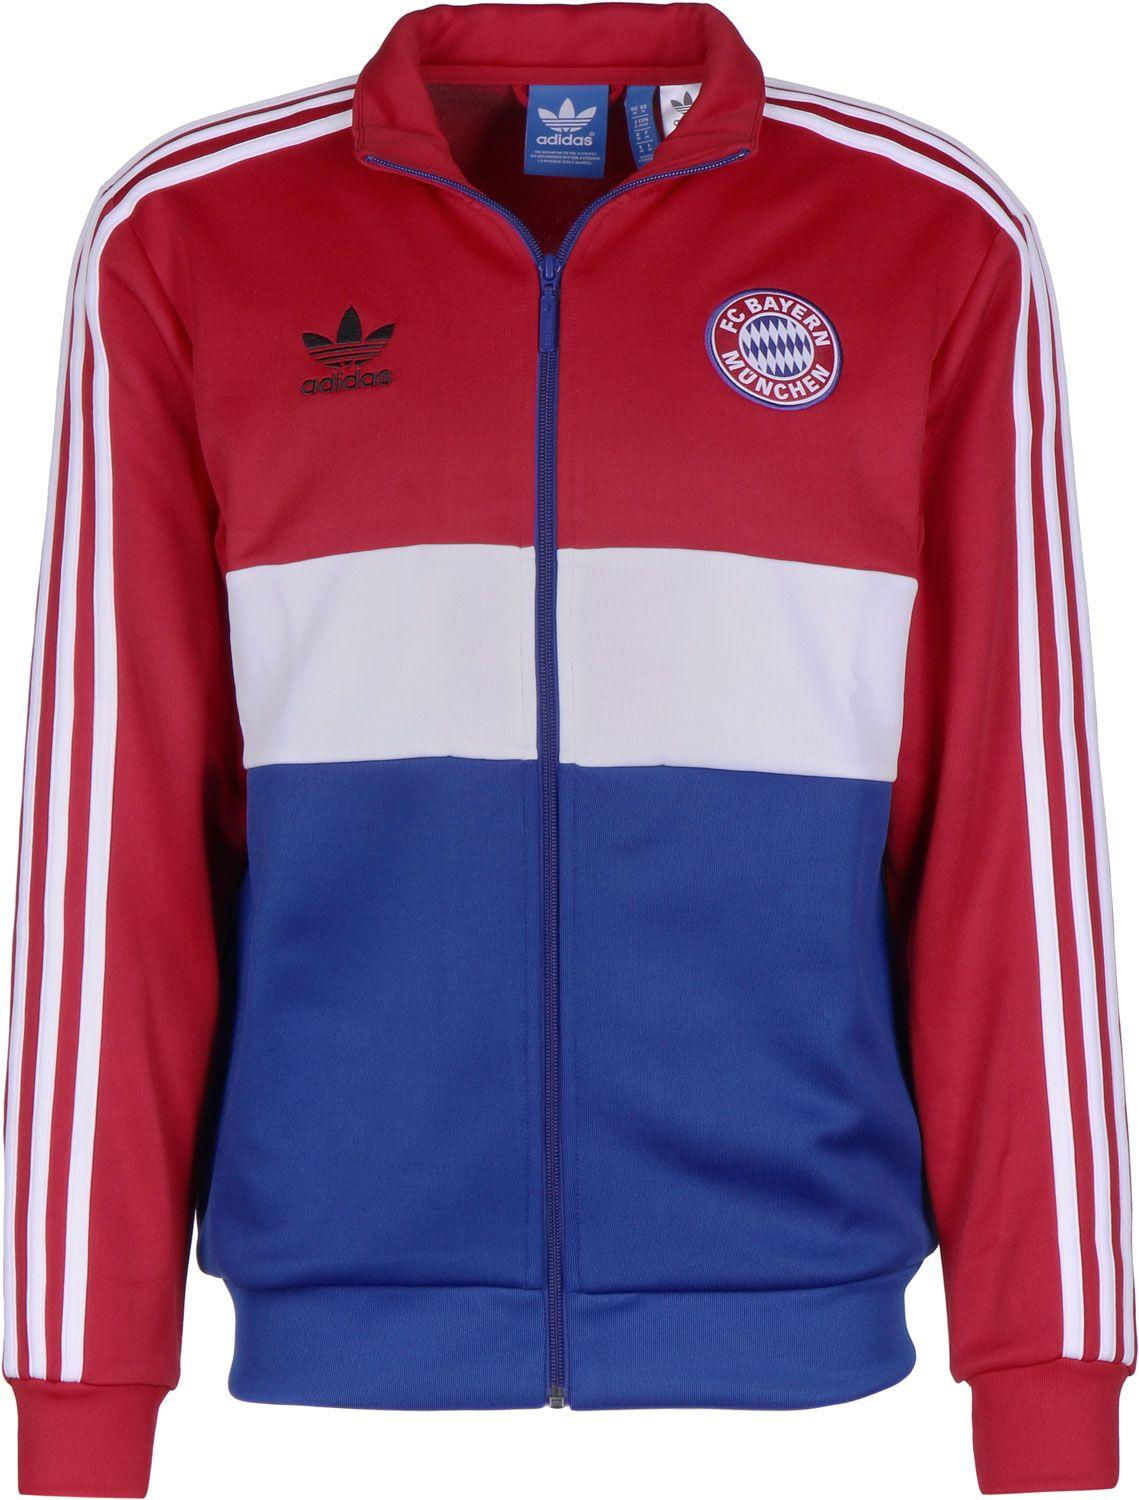 Red and White TT Logo - adidas clothing Adidas Bayern Tt Track Top - Red White Blue Tops For ...